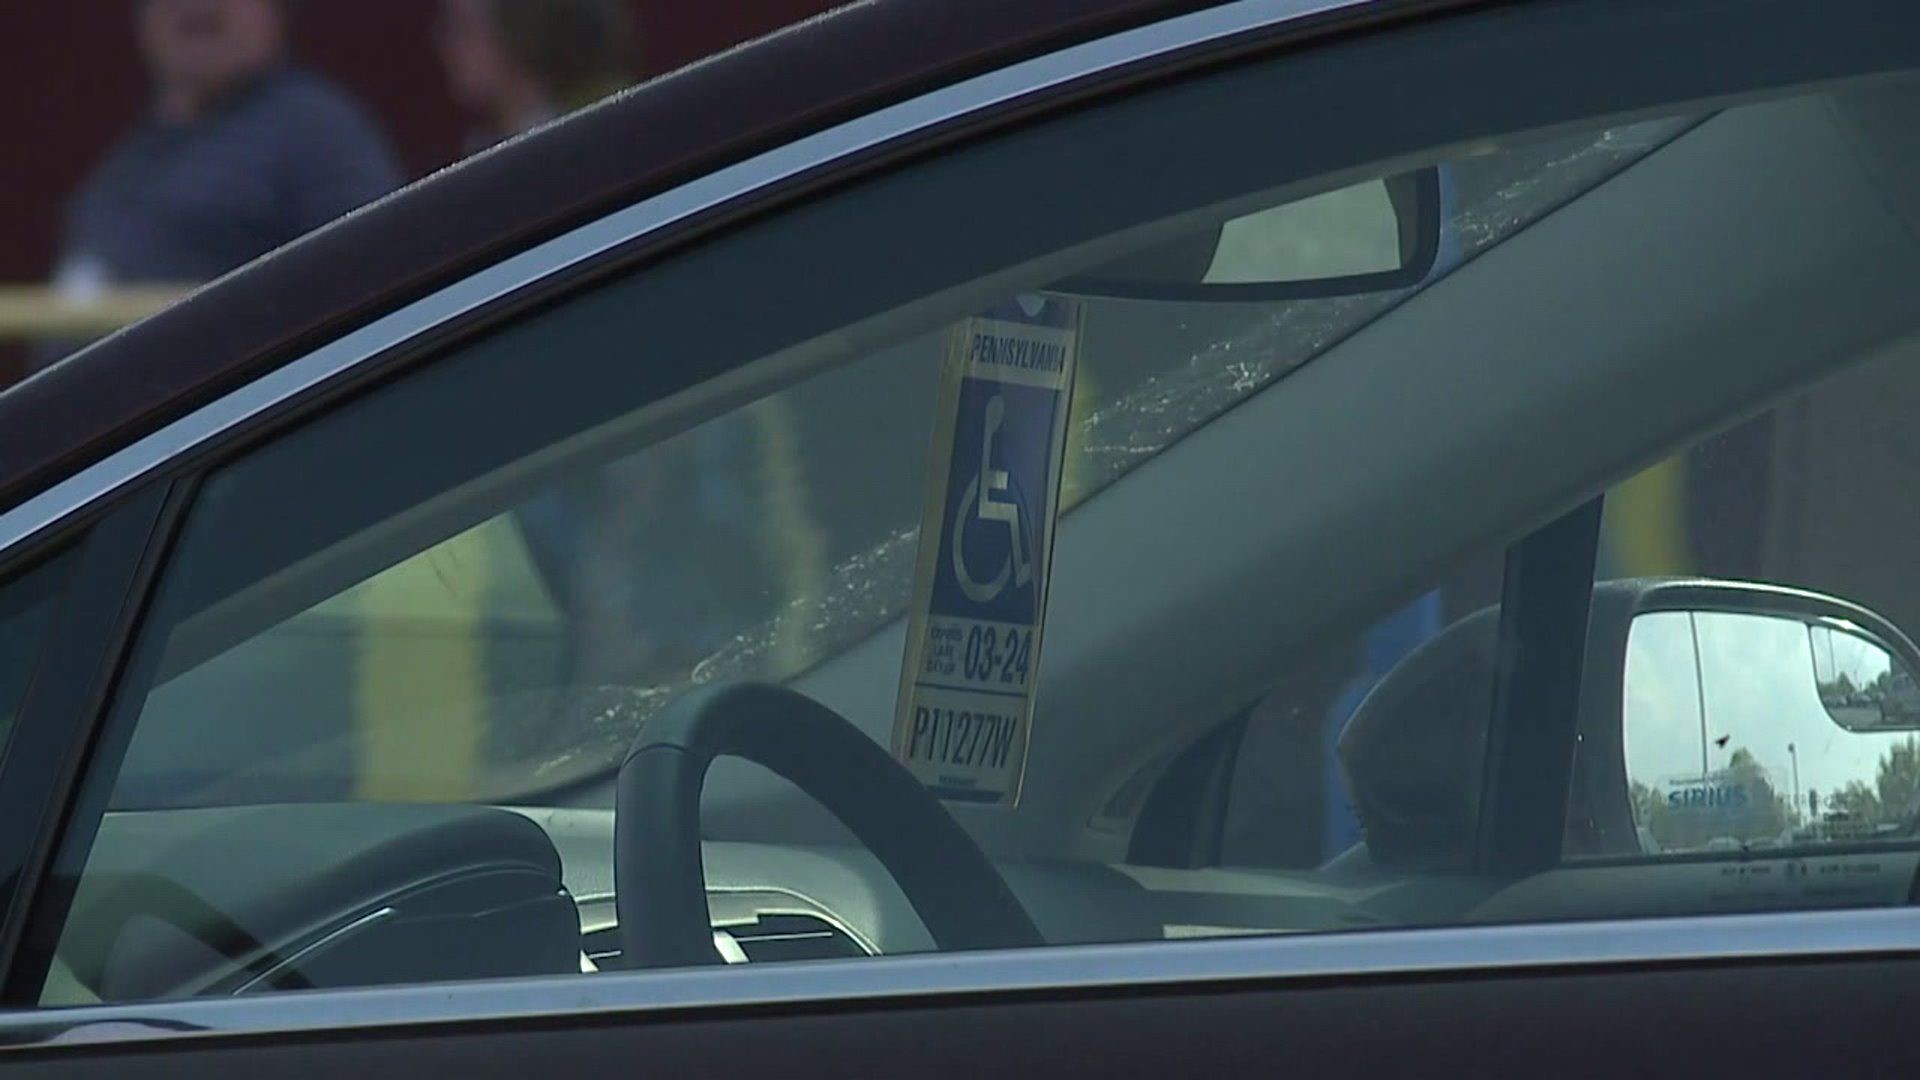 PennDOT Worker Charged with Stealing Handicap Placard to Park Illegally